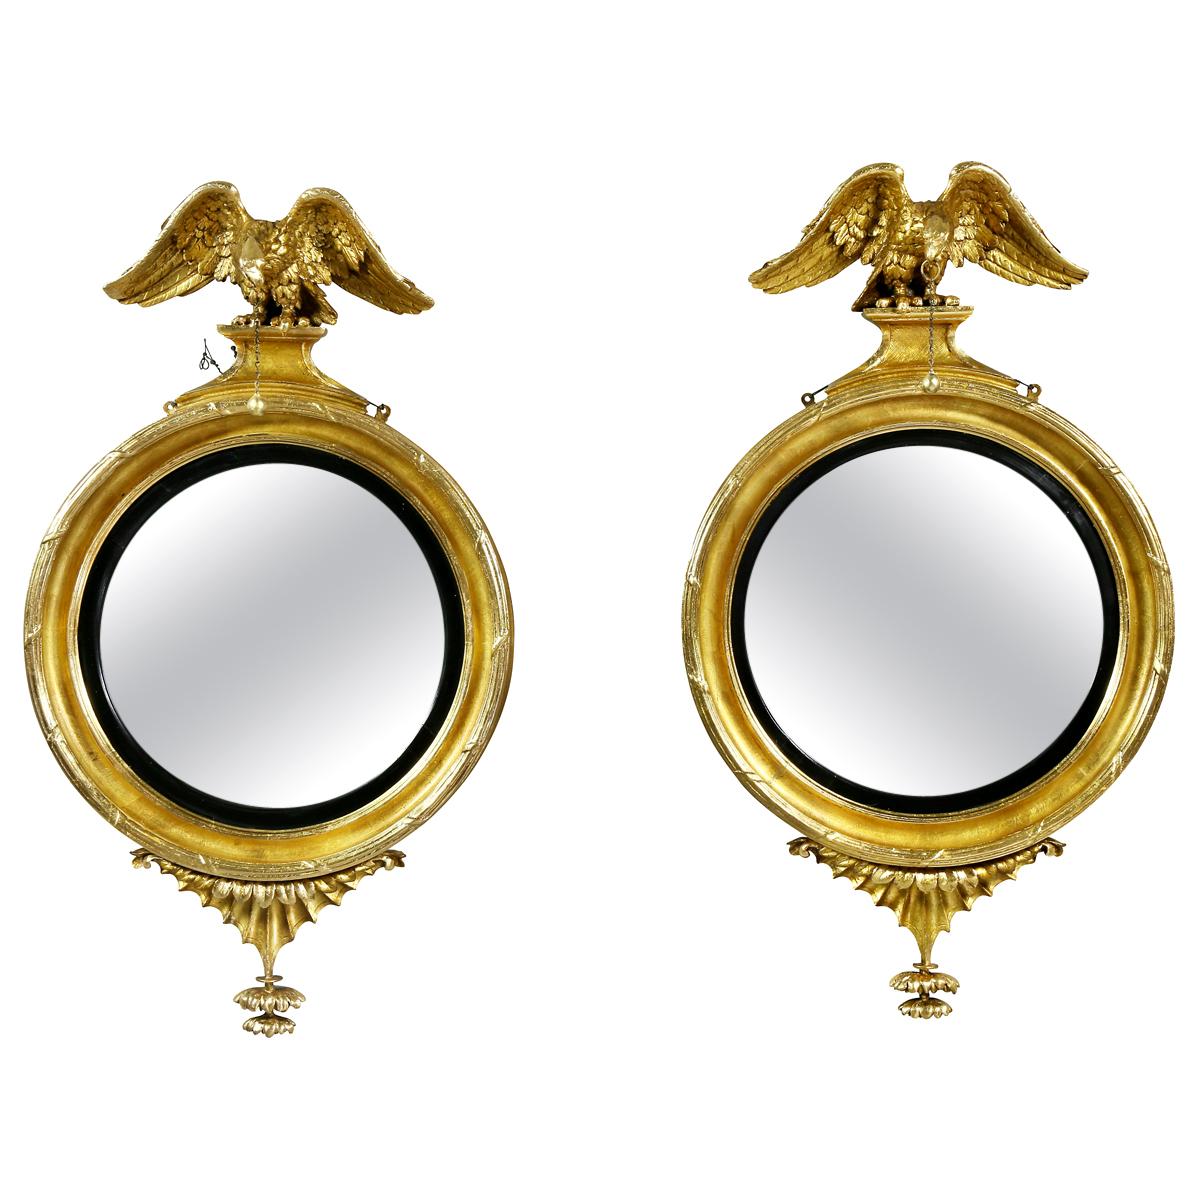 Pair Of Federal Giltwood Convex Mirrors